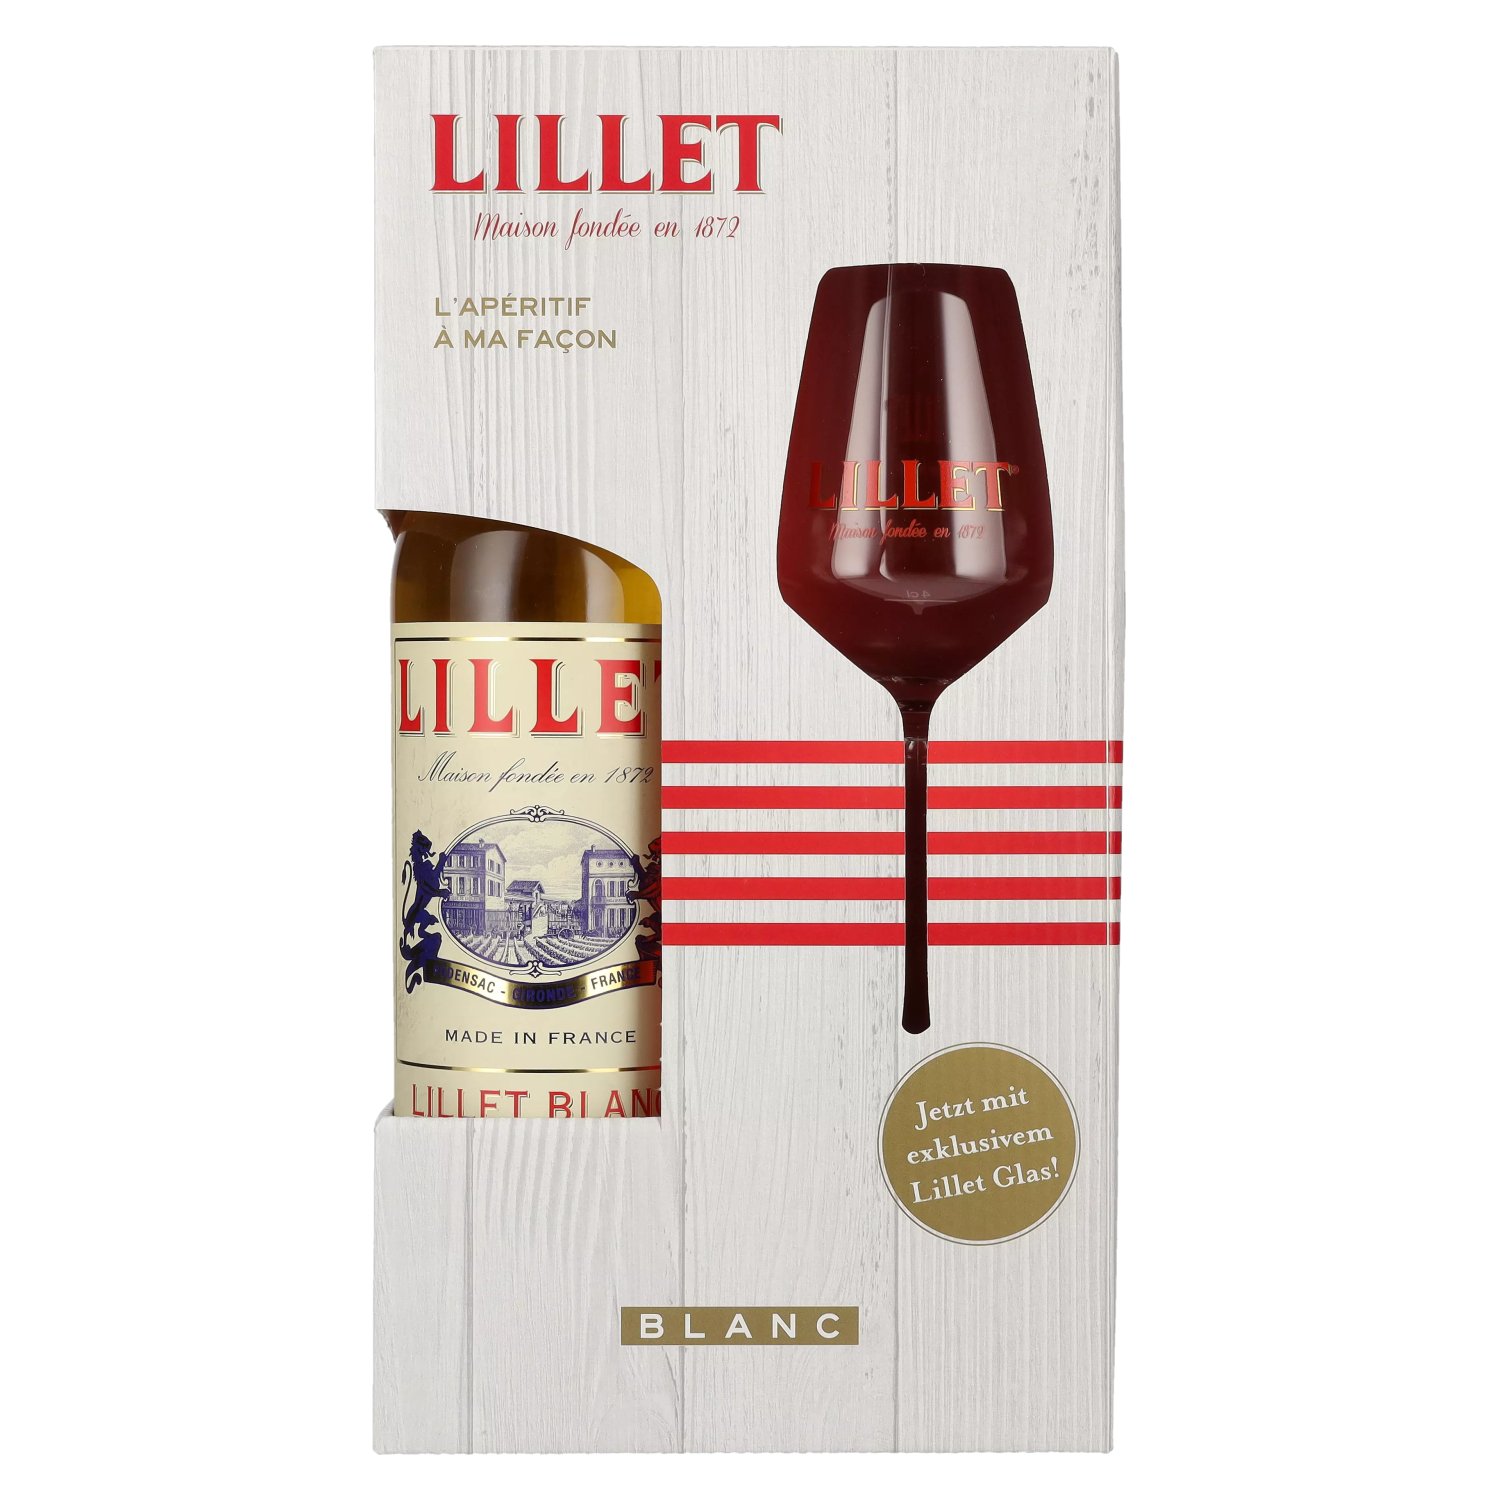 Lillet Blanc 17% Vol. 0,75l with in Giftbox glass